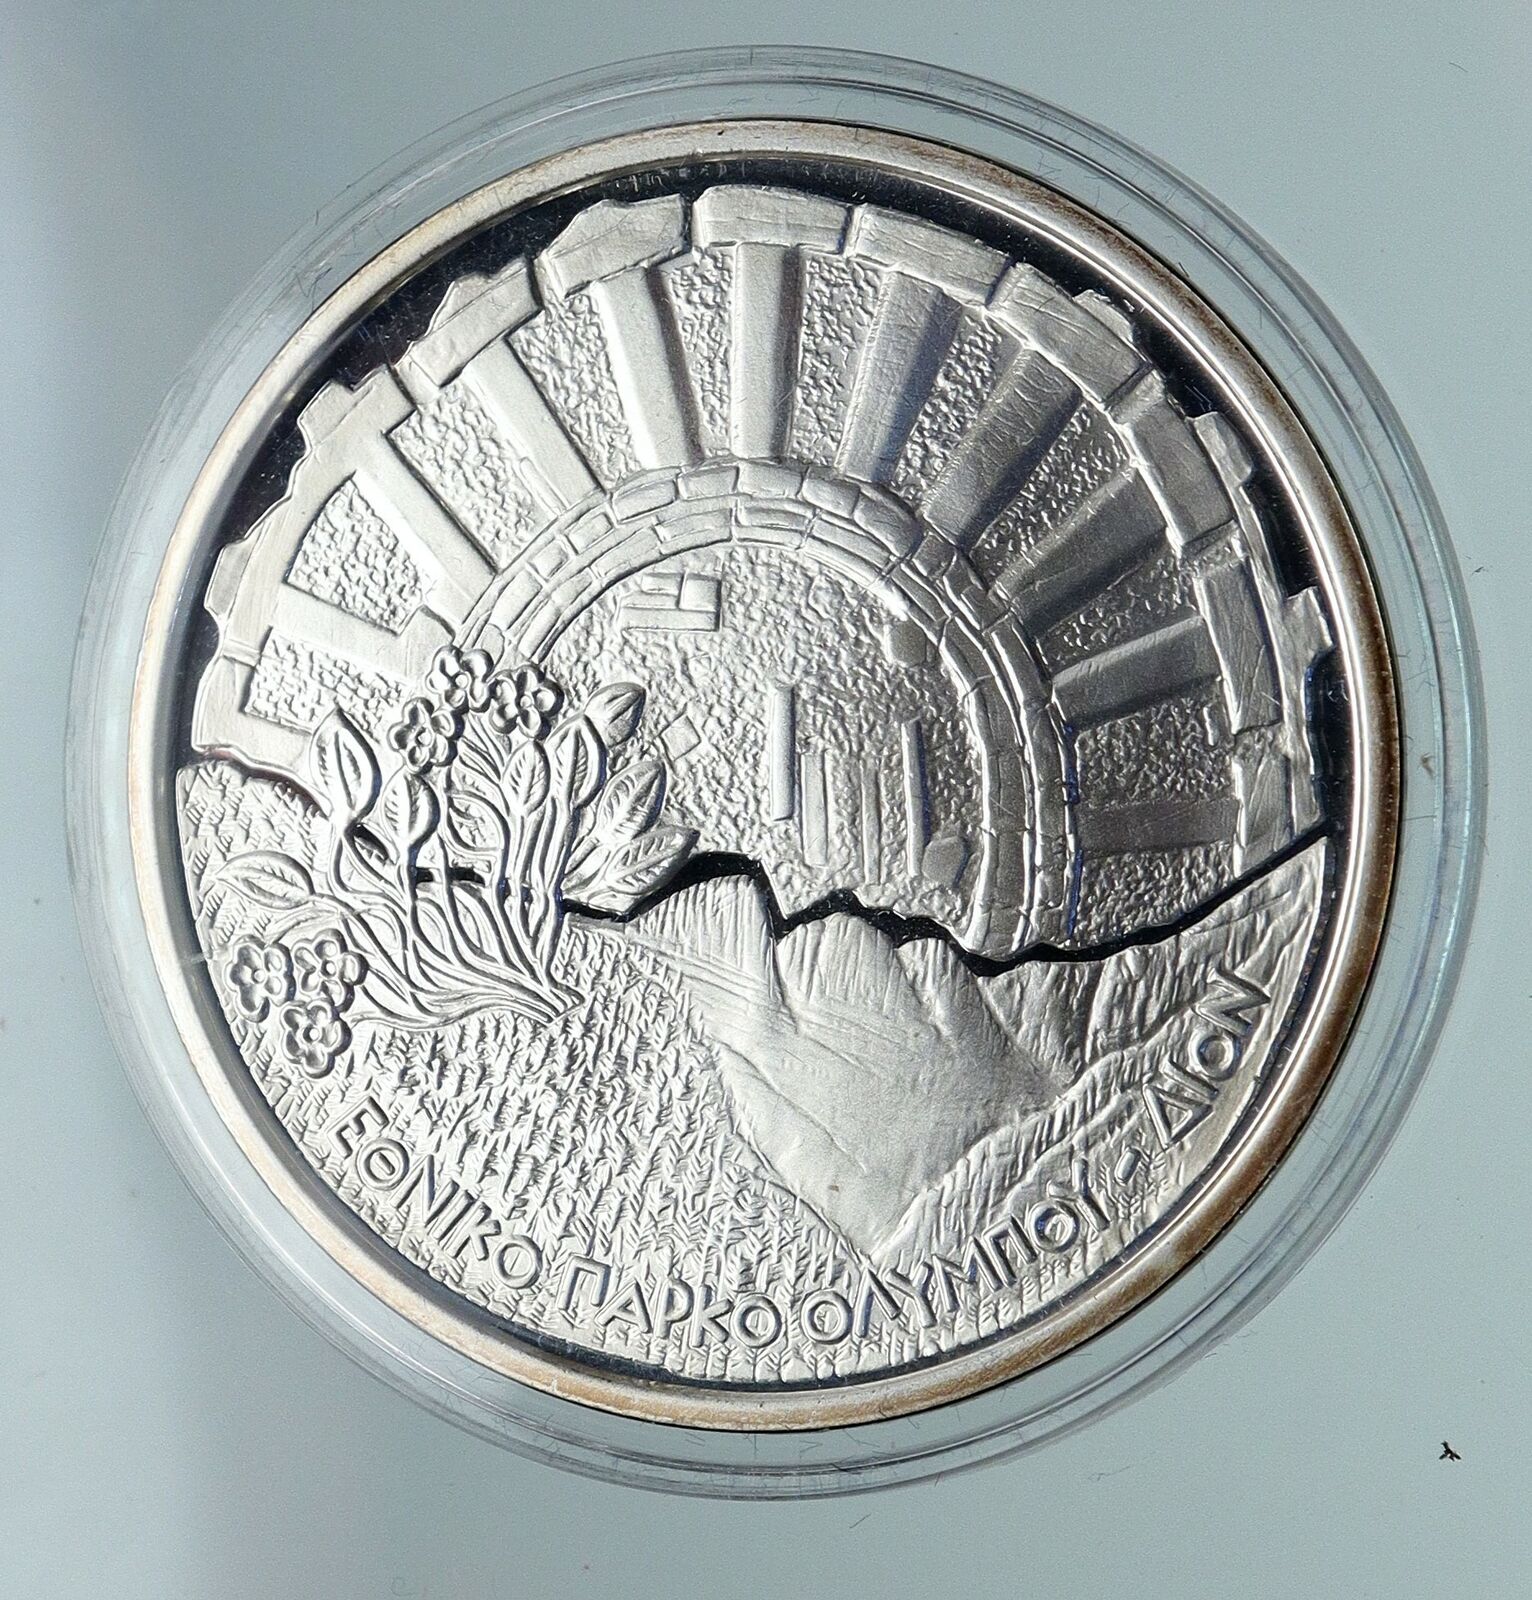 2006 GREECE National Park MOUNT OLYMPUS at Dion Proof Silver 10 Euro Coin i86475